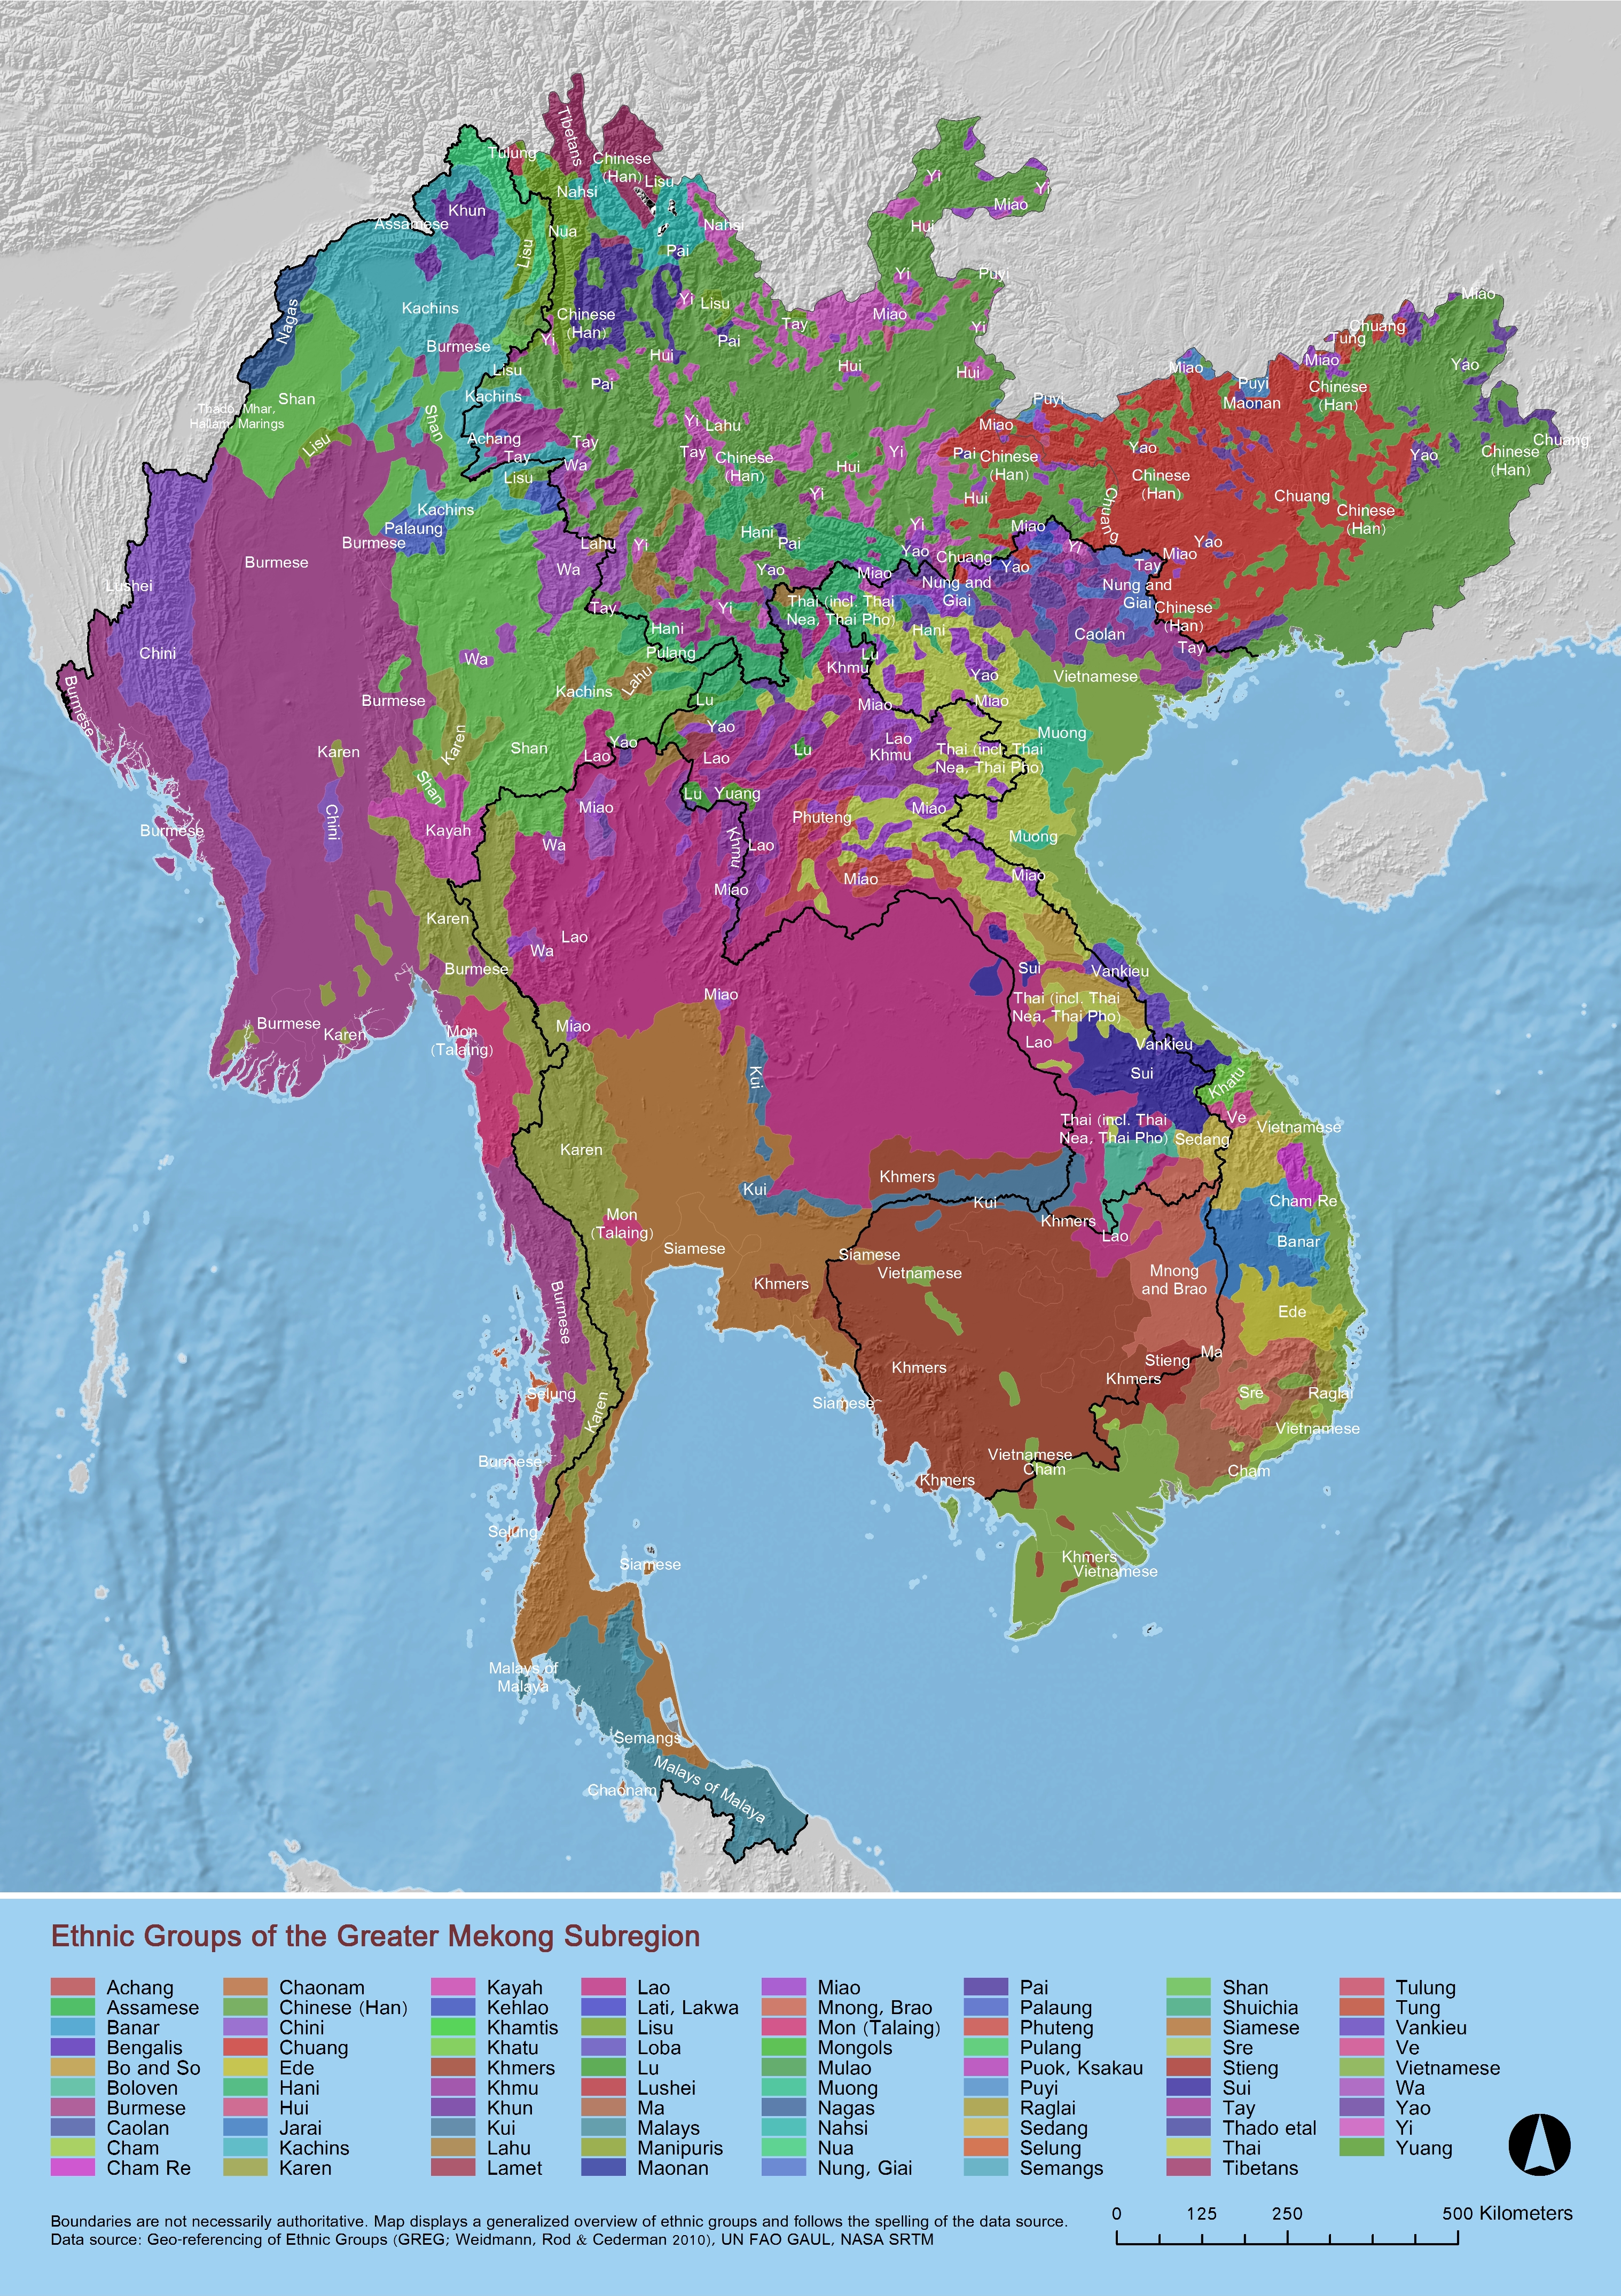 Ethnic Groups in the Greater Mekong subregion